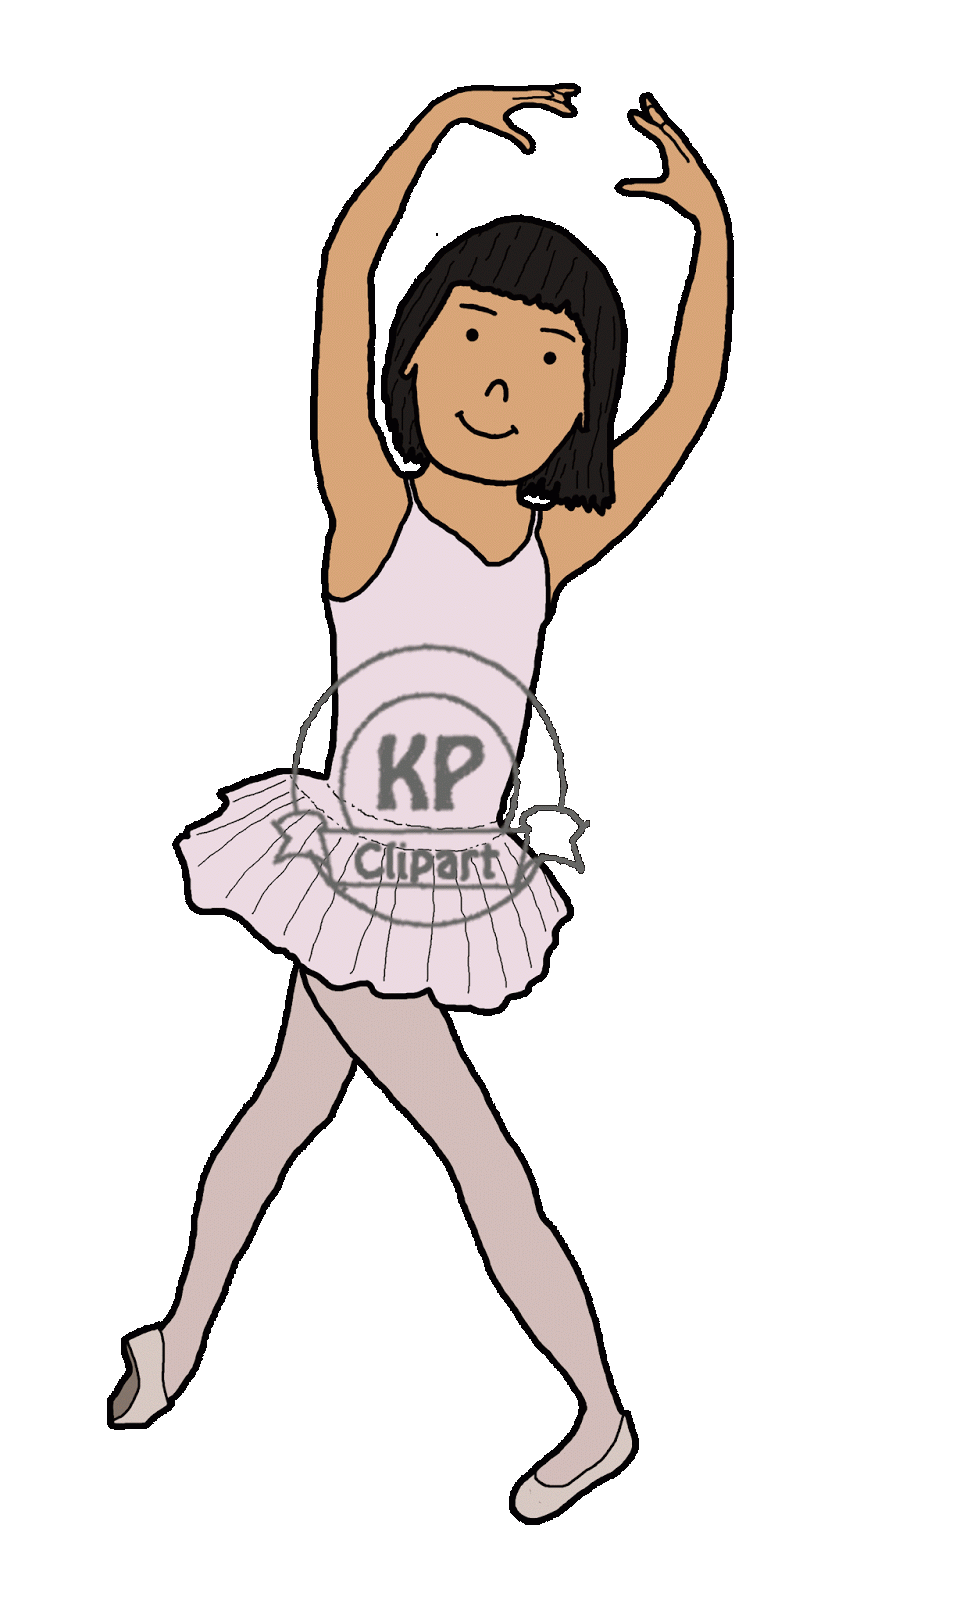 Clipart friends dance. Kp dancing and here